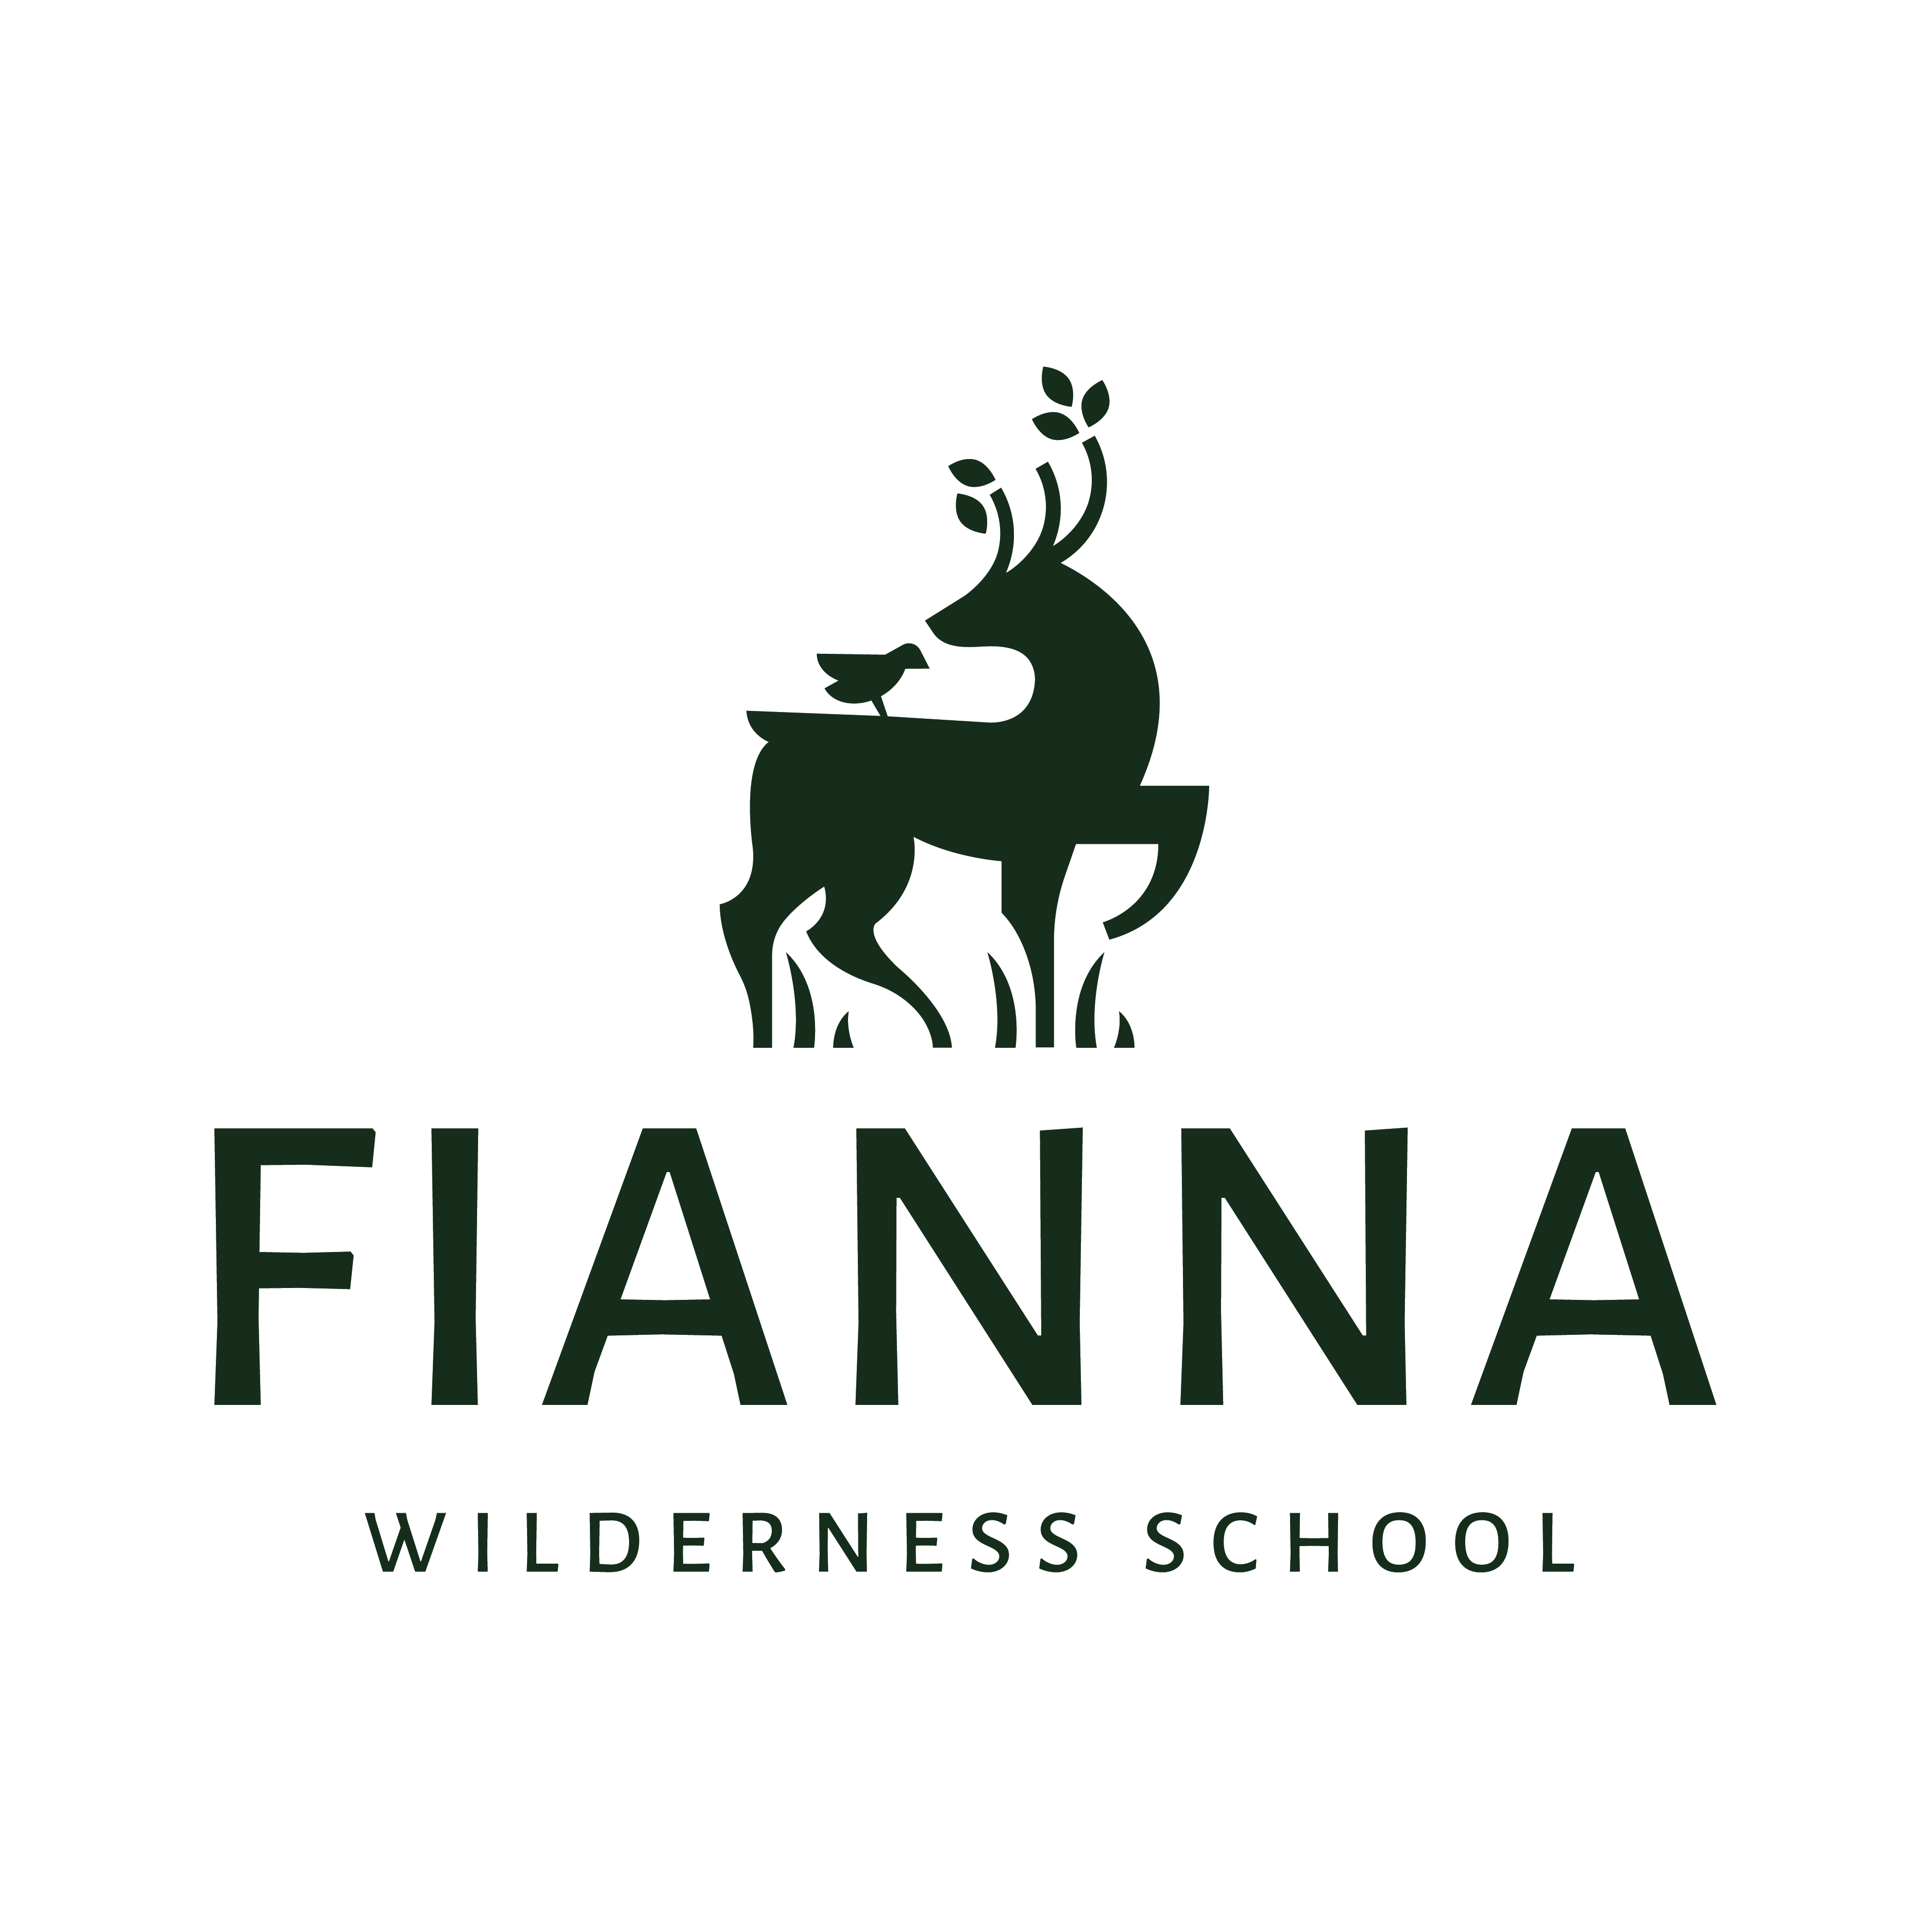 Fianna Wilderness School logo design by logo designer Caribou Creative for your inspiration and for the worlds largest logo competition